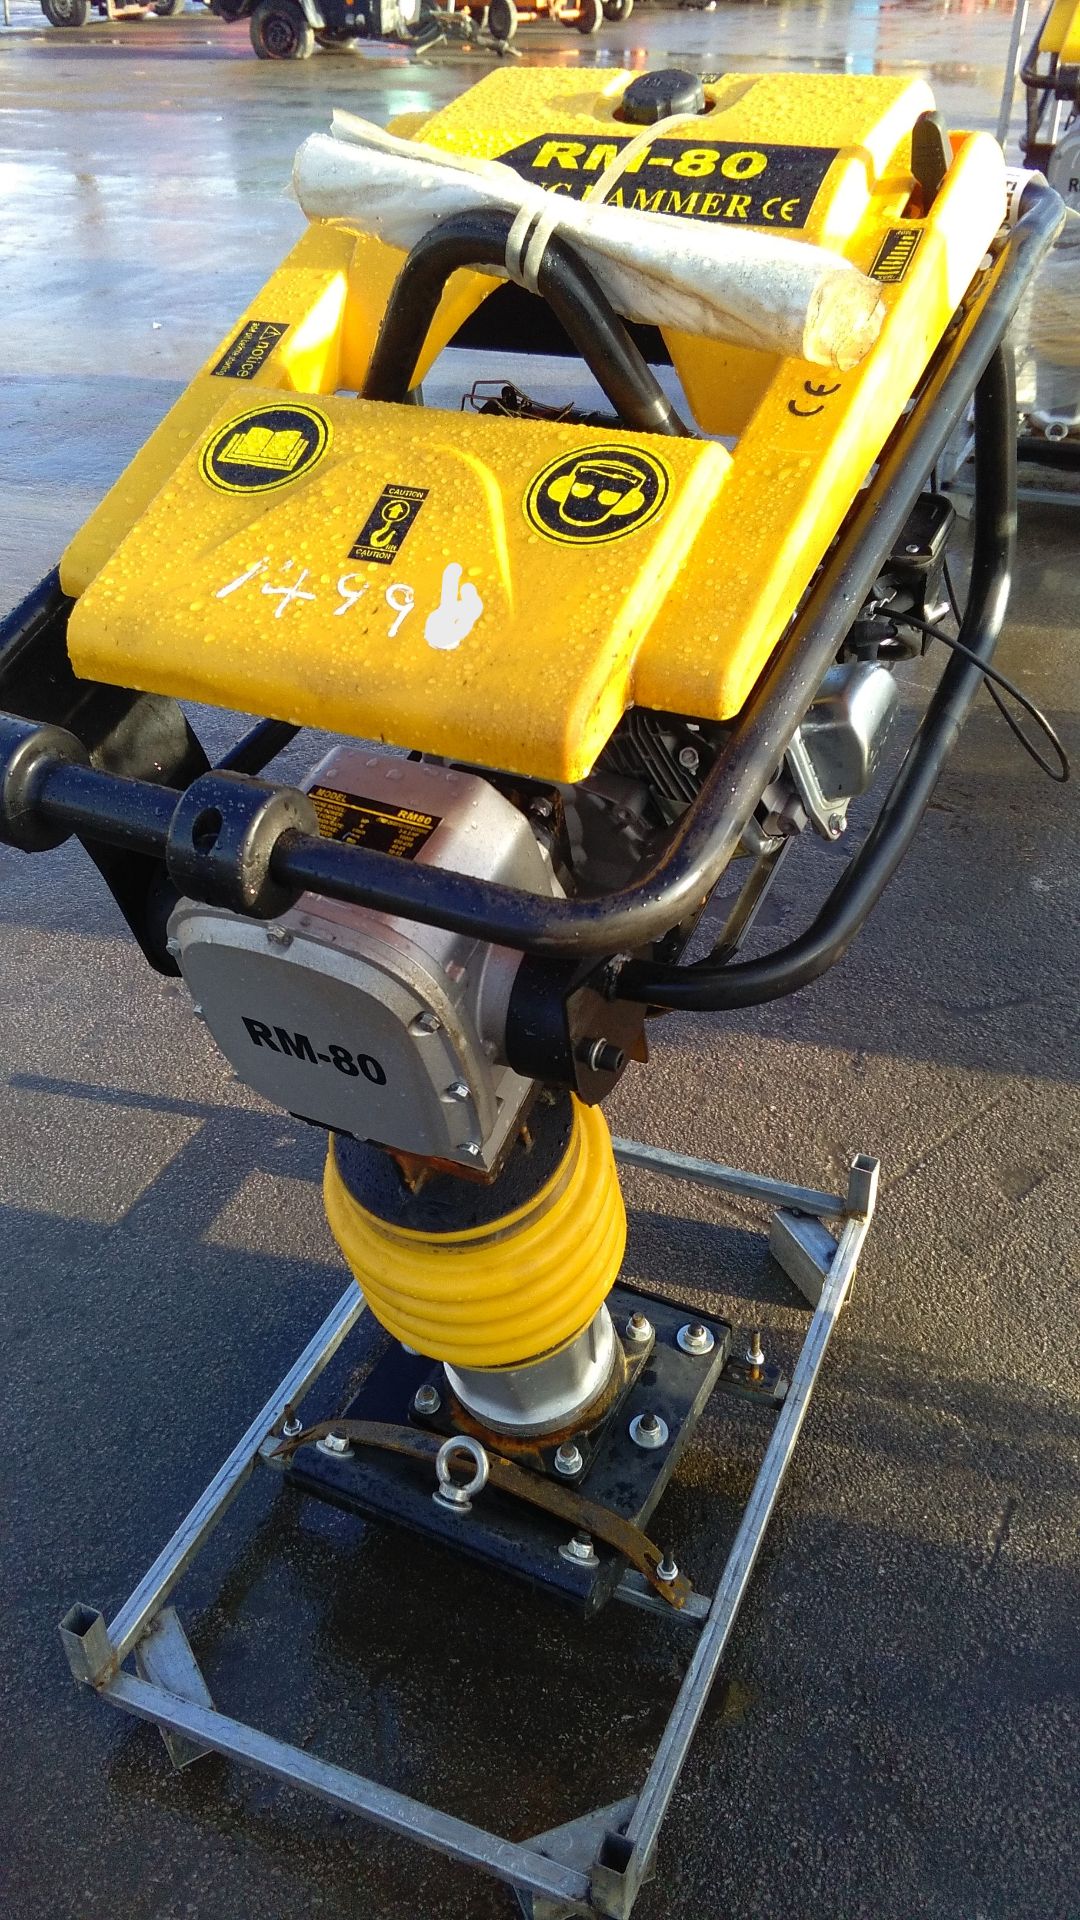 New Tamping Rammer RM-80. Elephant's foot wacker/vibrating plate